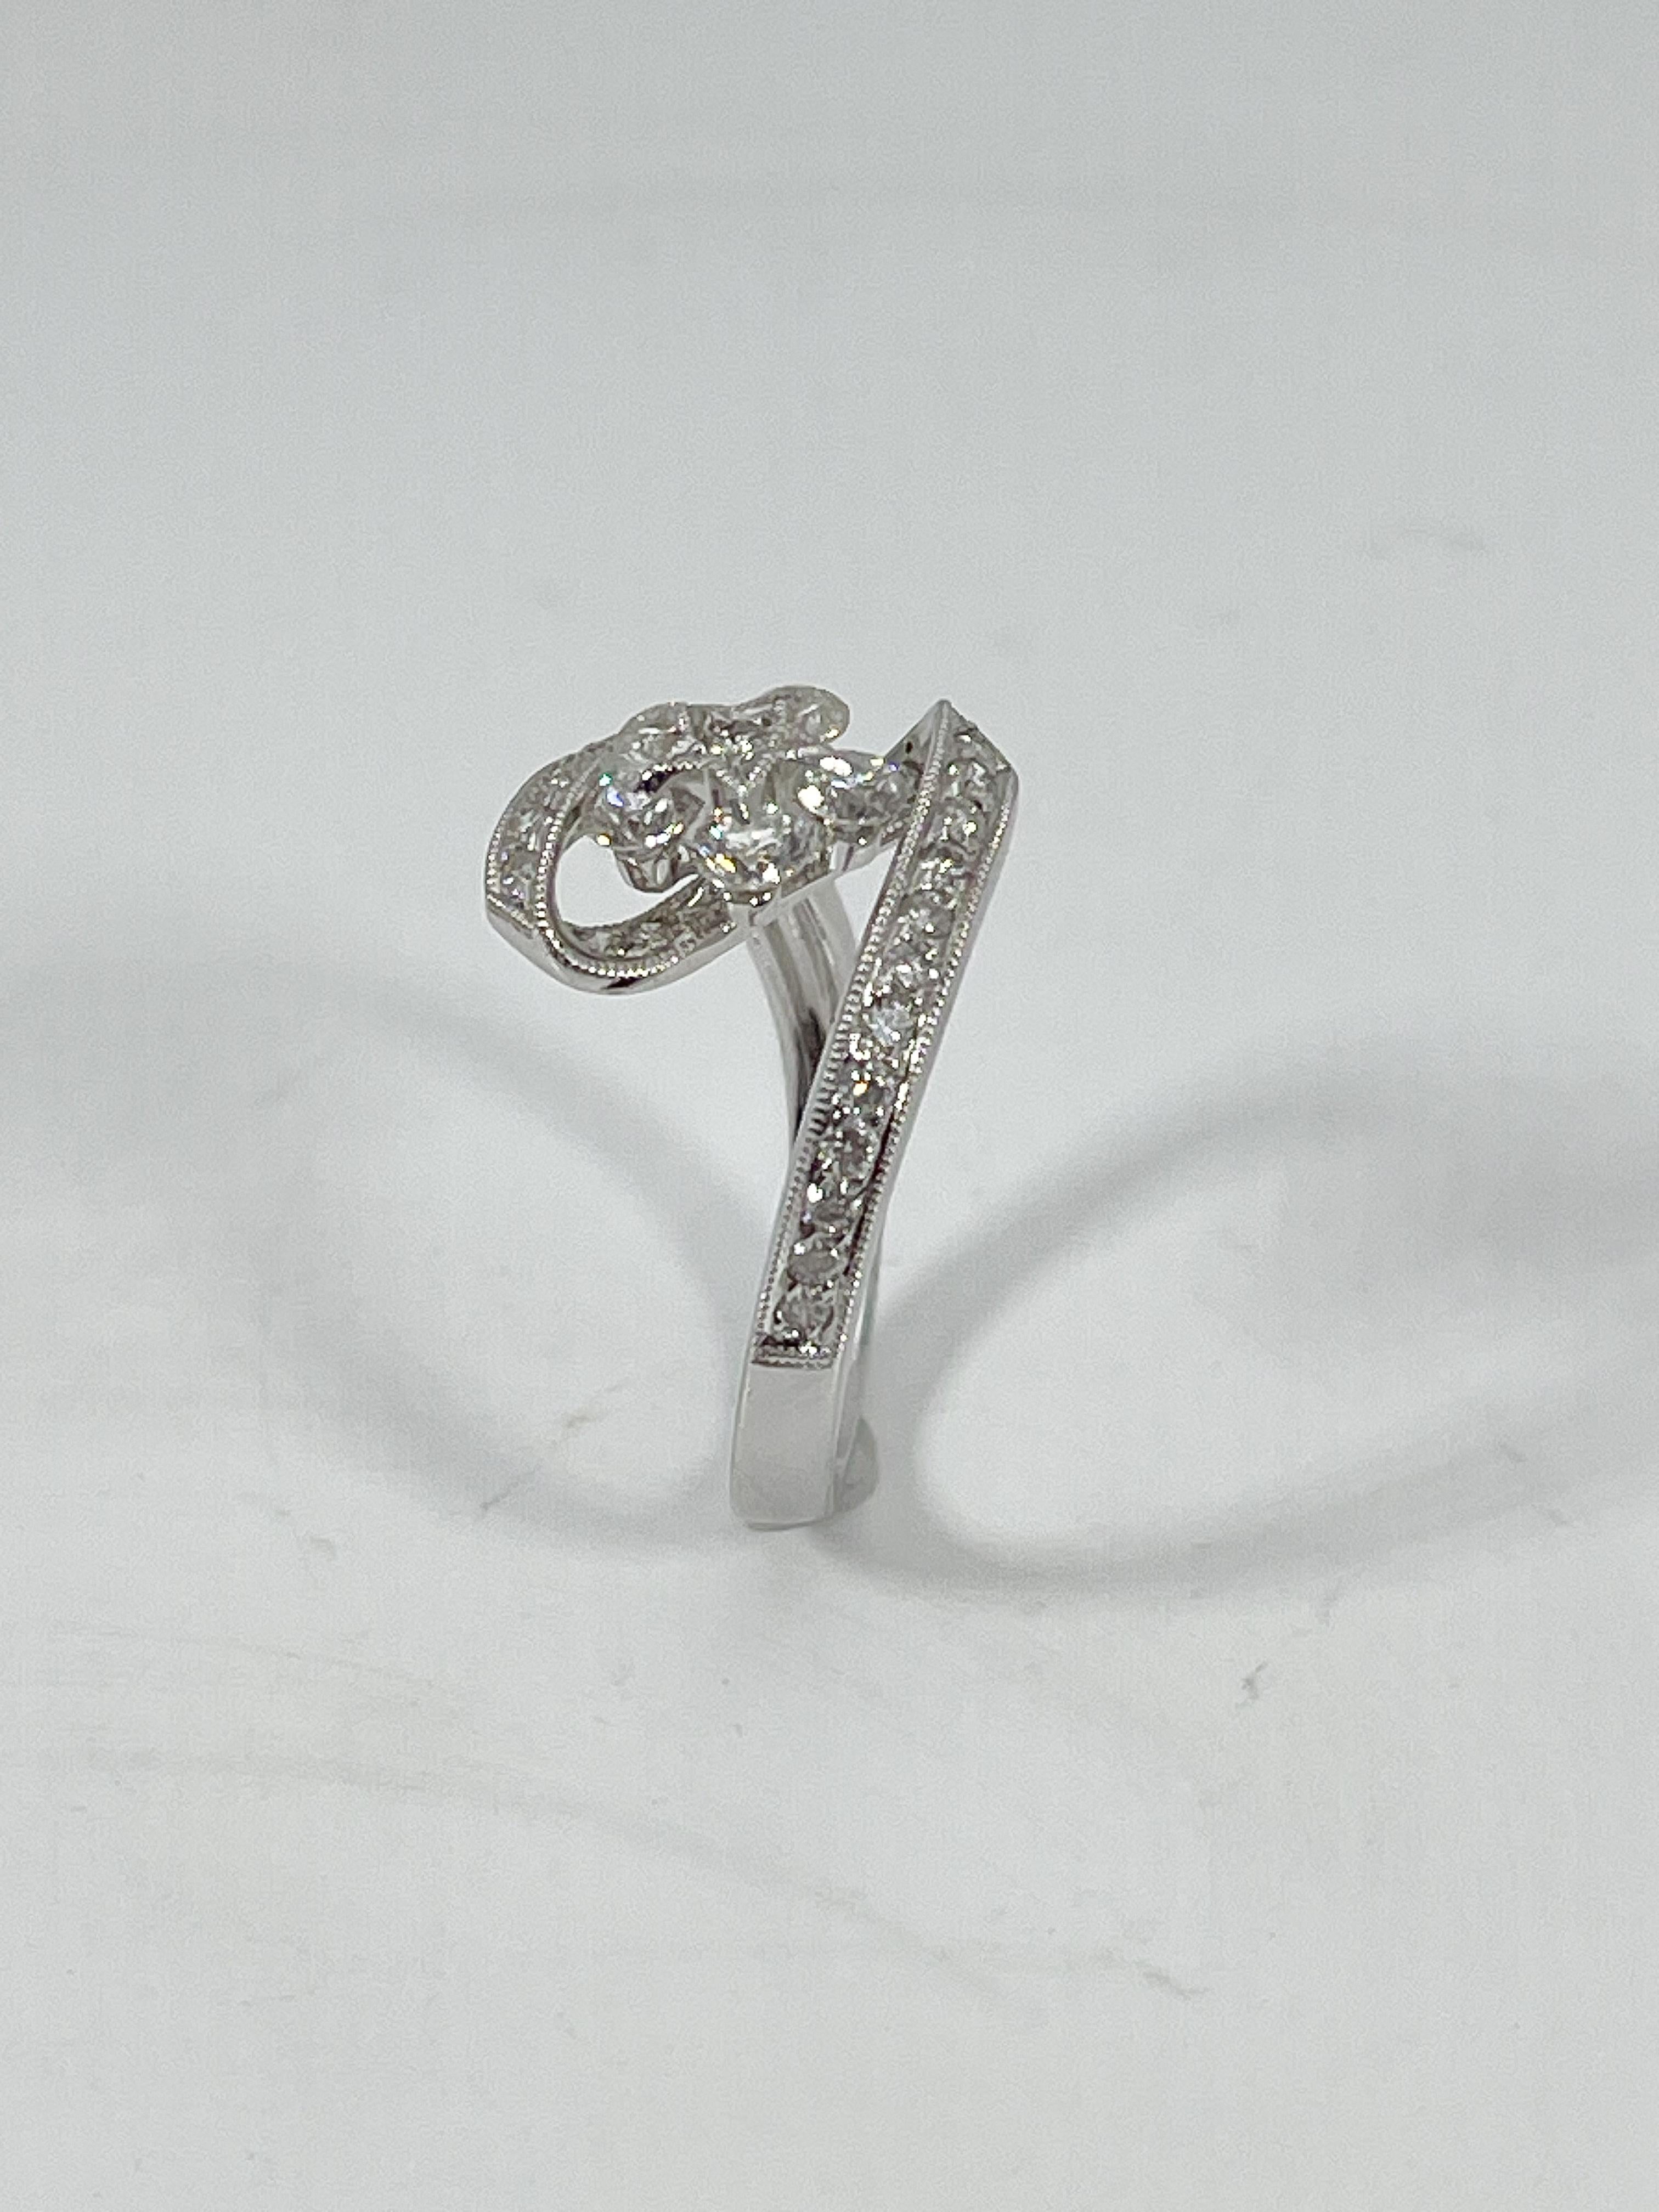 18K White Gold 1 CTW Diamond Flower Fashion Ring In Excellent Condition For Sale In Stuart, FL